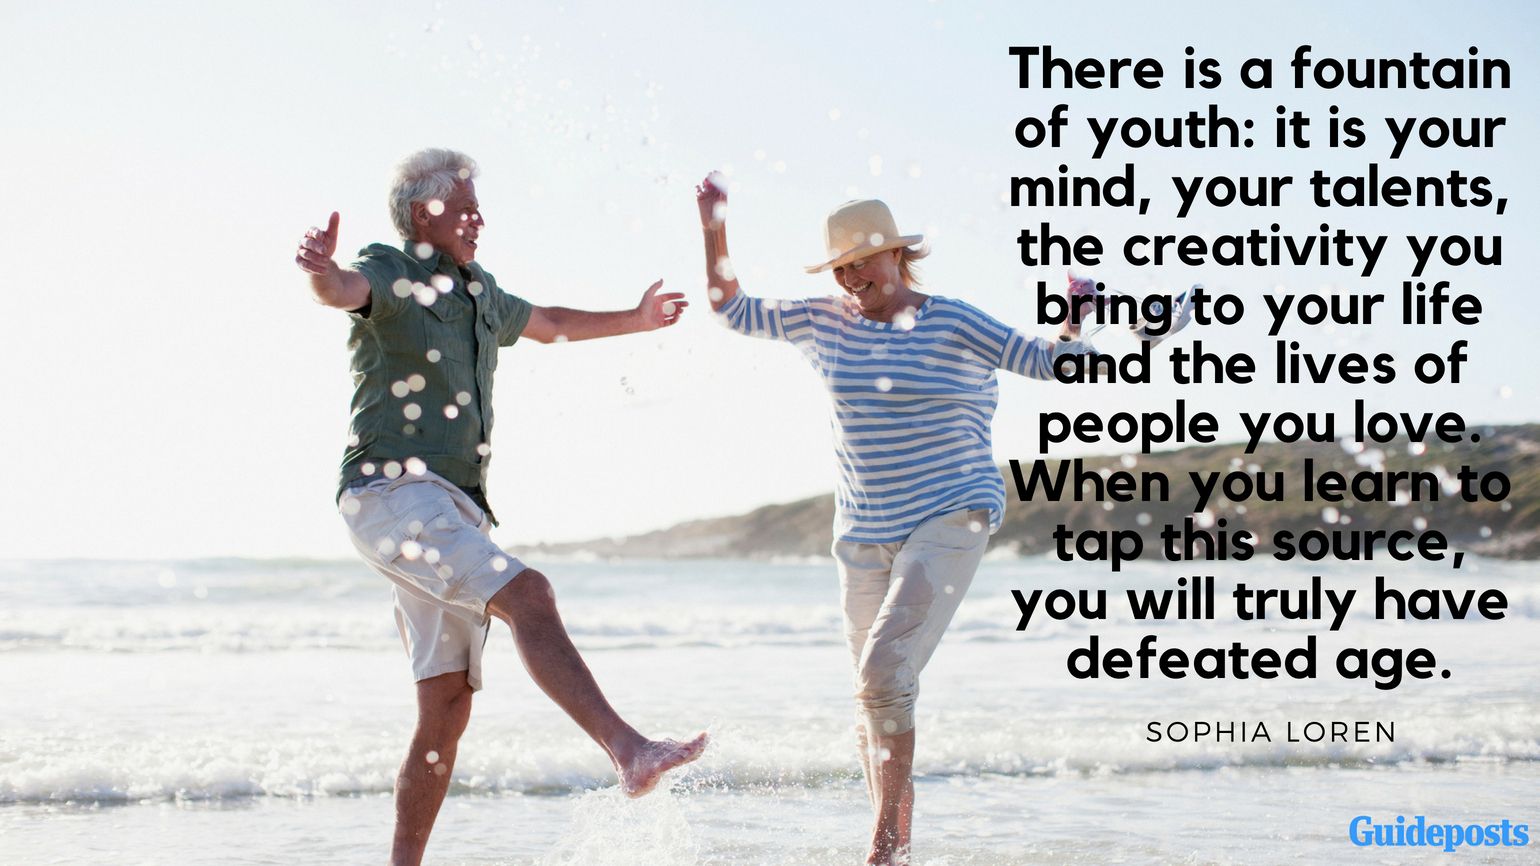 Inspirational Quotes for Retirement: “There is a fountain of youth: it is your mind, your talents, the creativity you bring to your life and the lives of people you love. When you learn to tap this source, you will truly have defeated age.” – Sophia Loren Better Living Life Advice